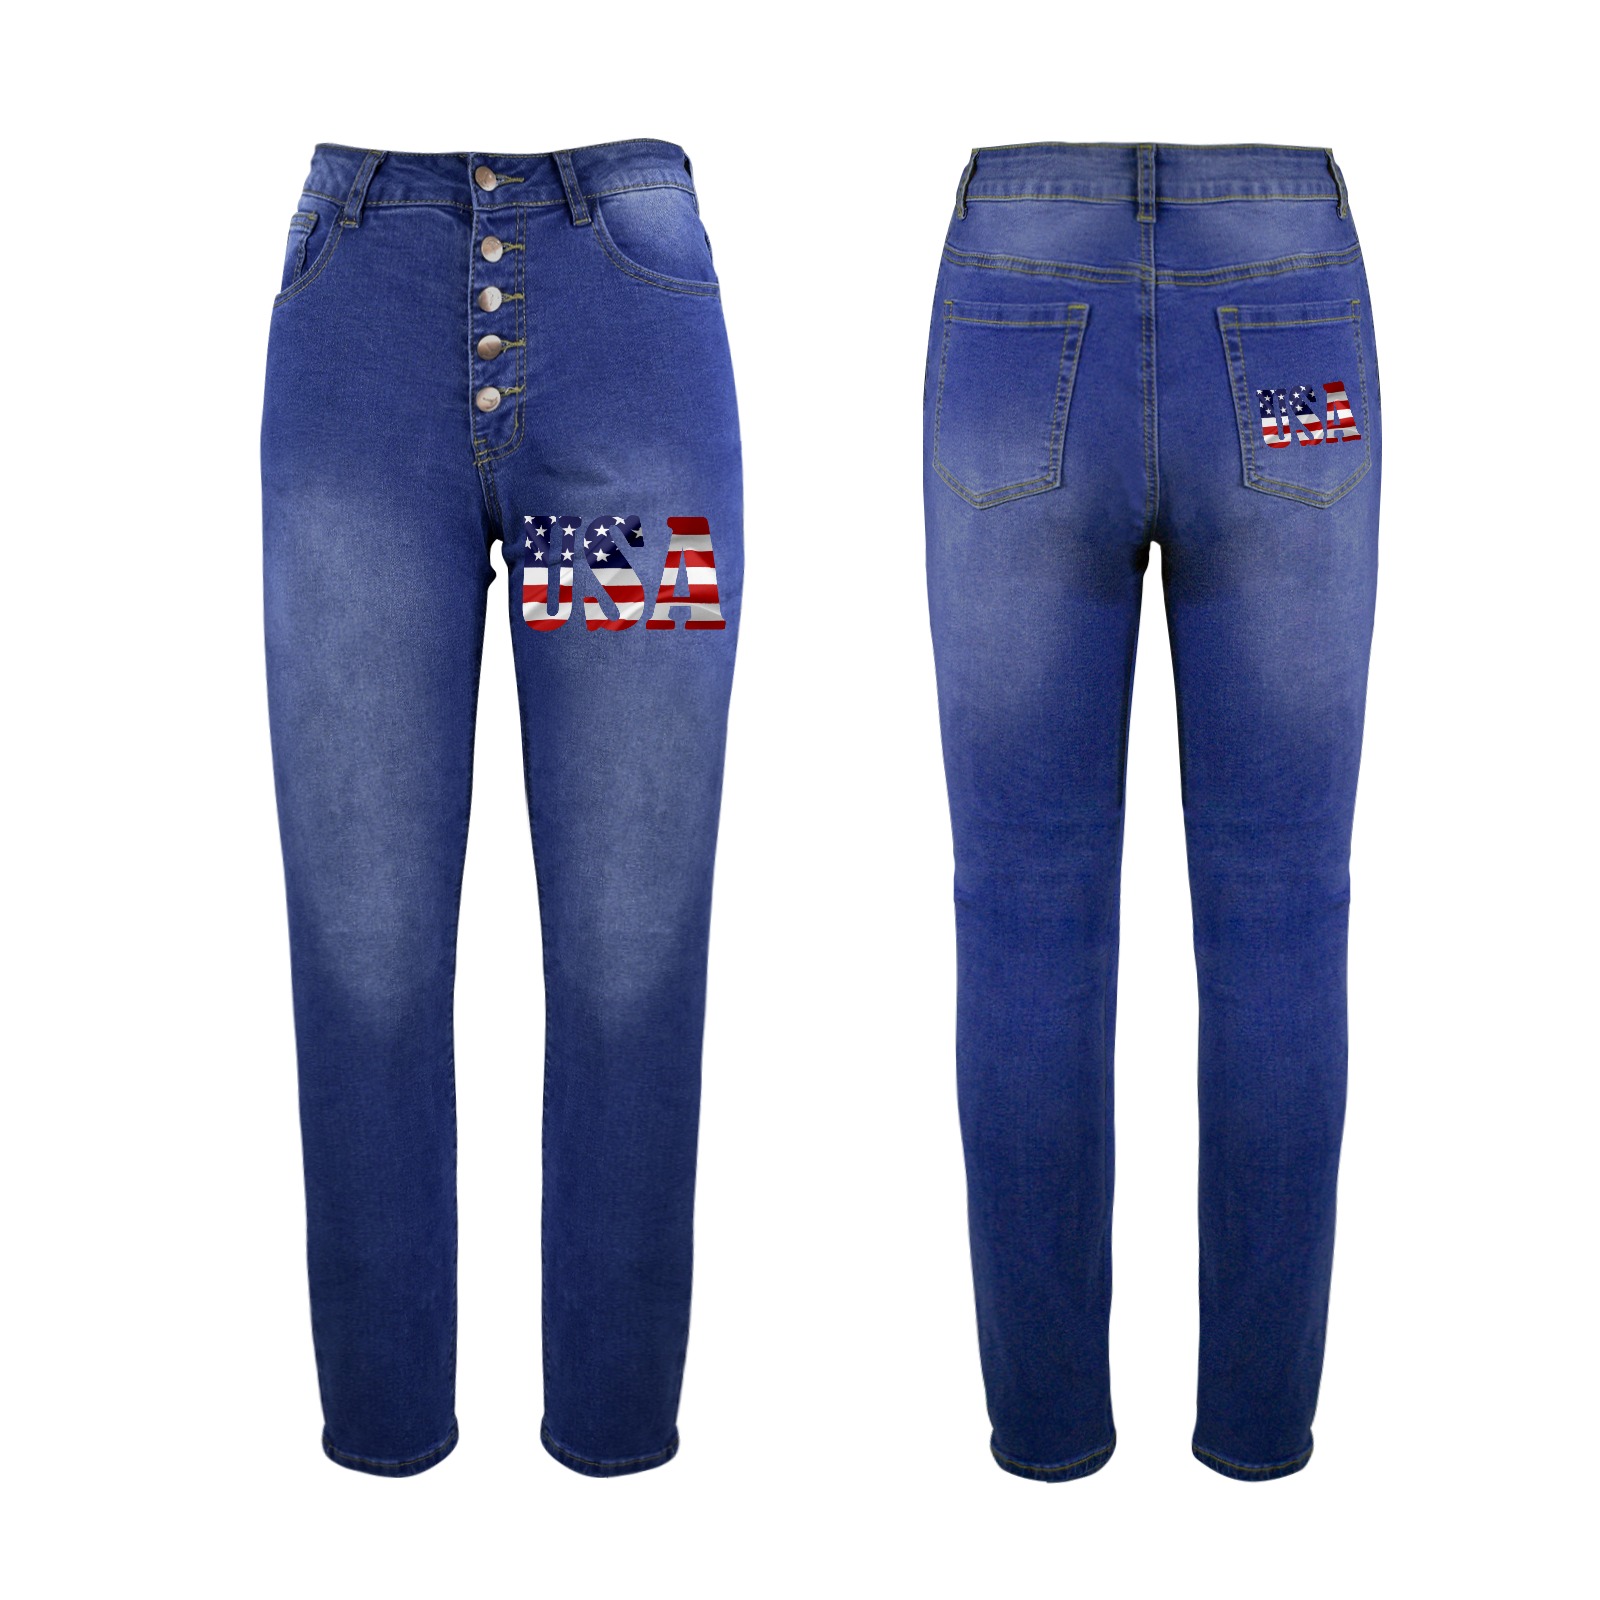 USA text decorated with the American flag art. Women's Jeans (Front&Back Printing)